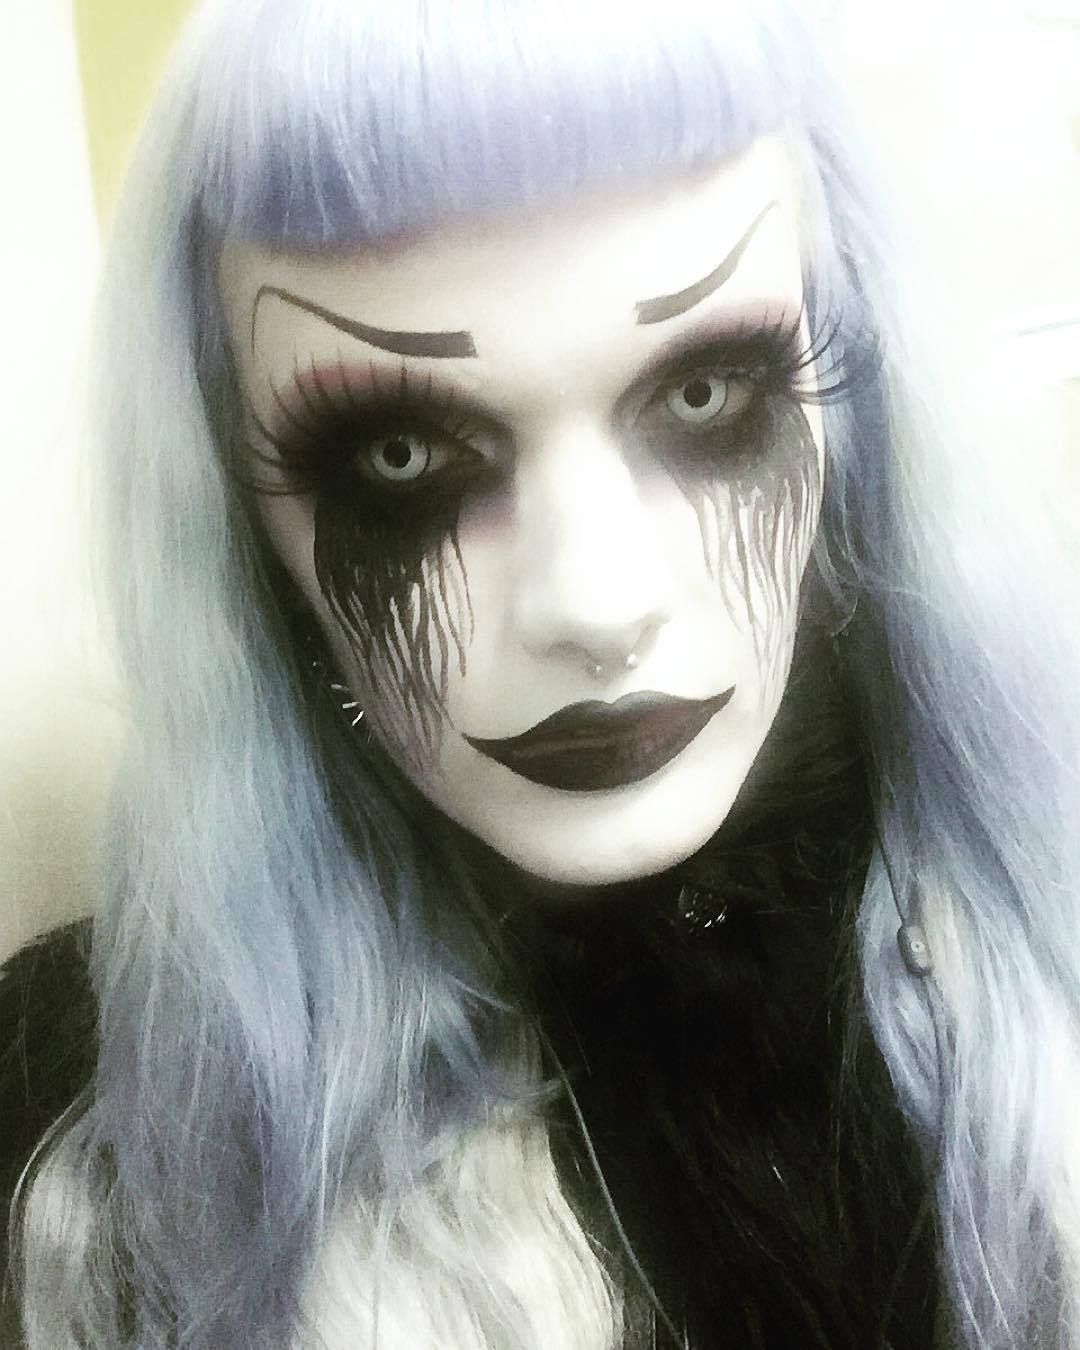 Very crappy picture on my makeup for the #behemoth concert yesterday. #goth #gothic #gothgoth #gothmakeup #metal #blackmetal #vampire #ucg #upperclassgoth